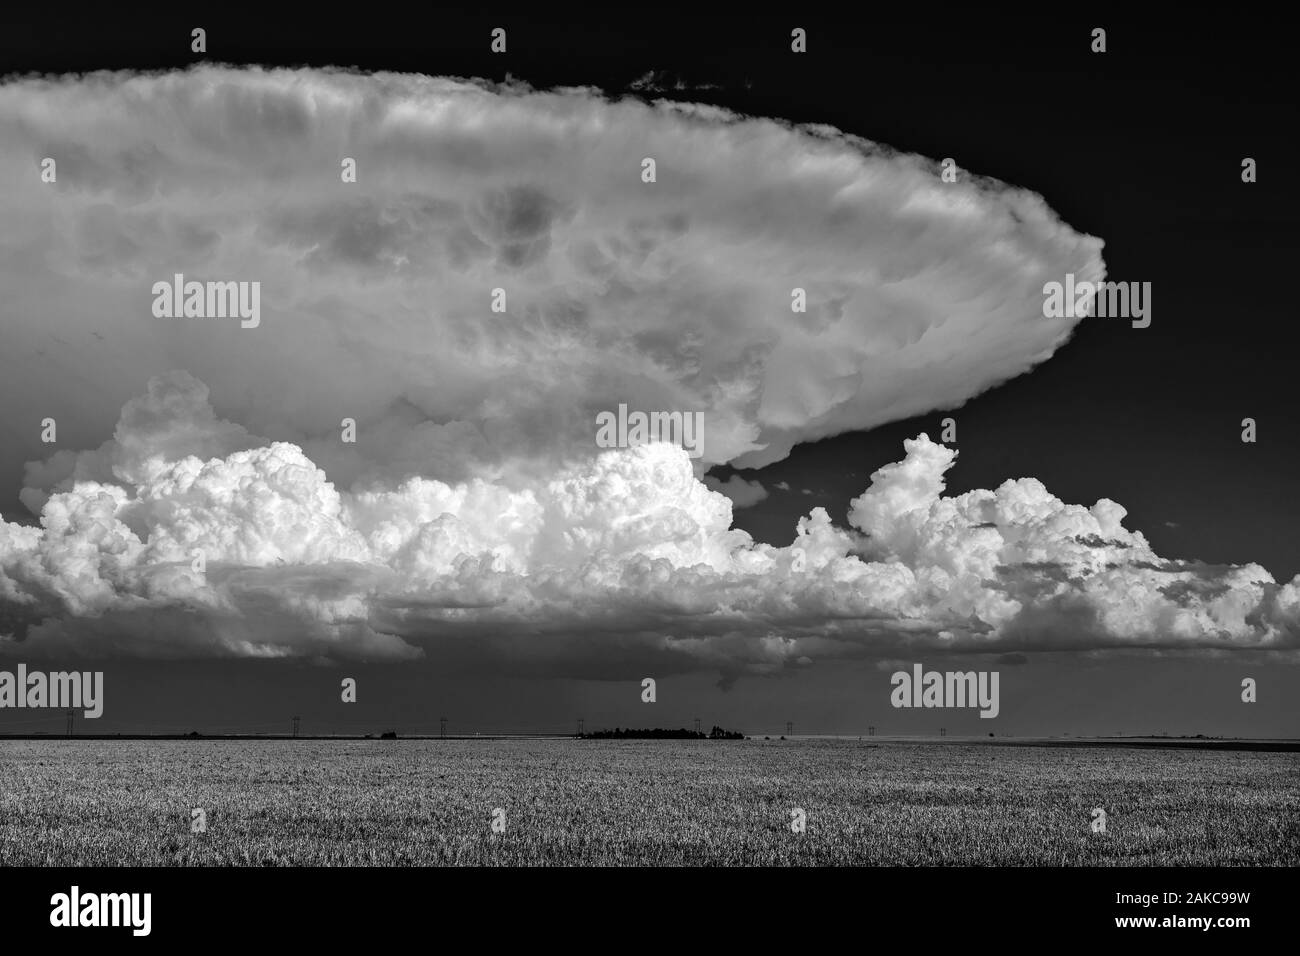 Scenic Great Plains landscape with a thunderstorm cumulonimbus cloud anvil in the sky over a field near Goodland, Kansas Stock Photo